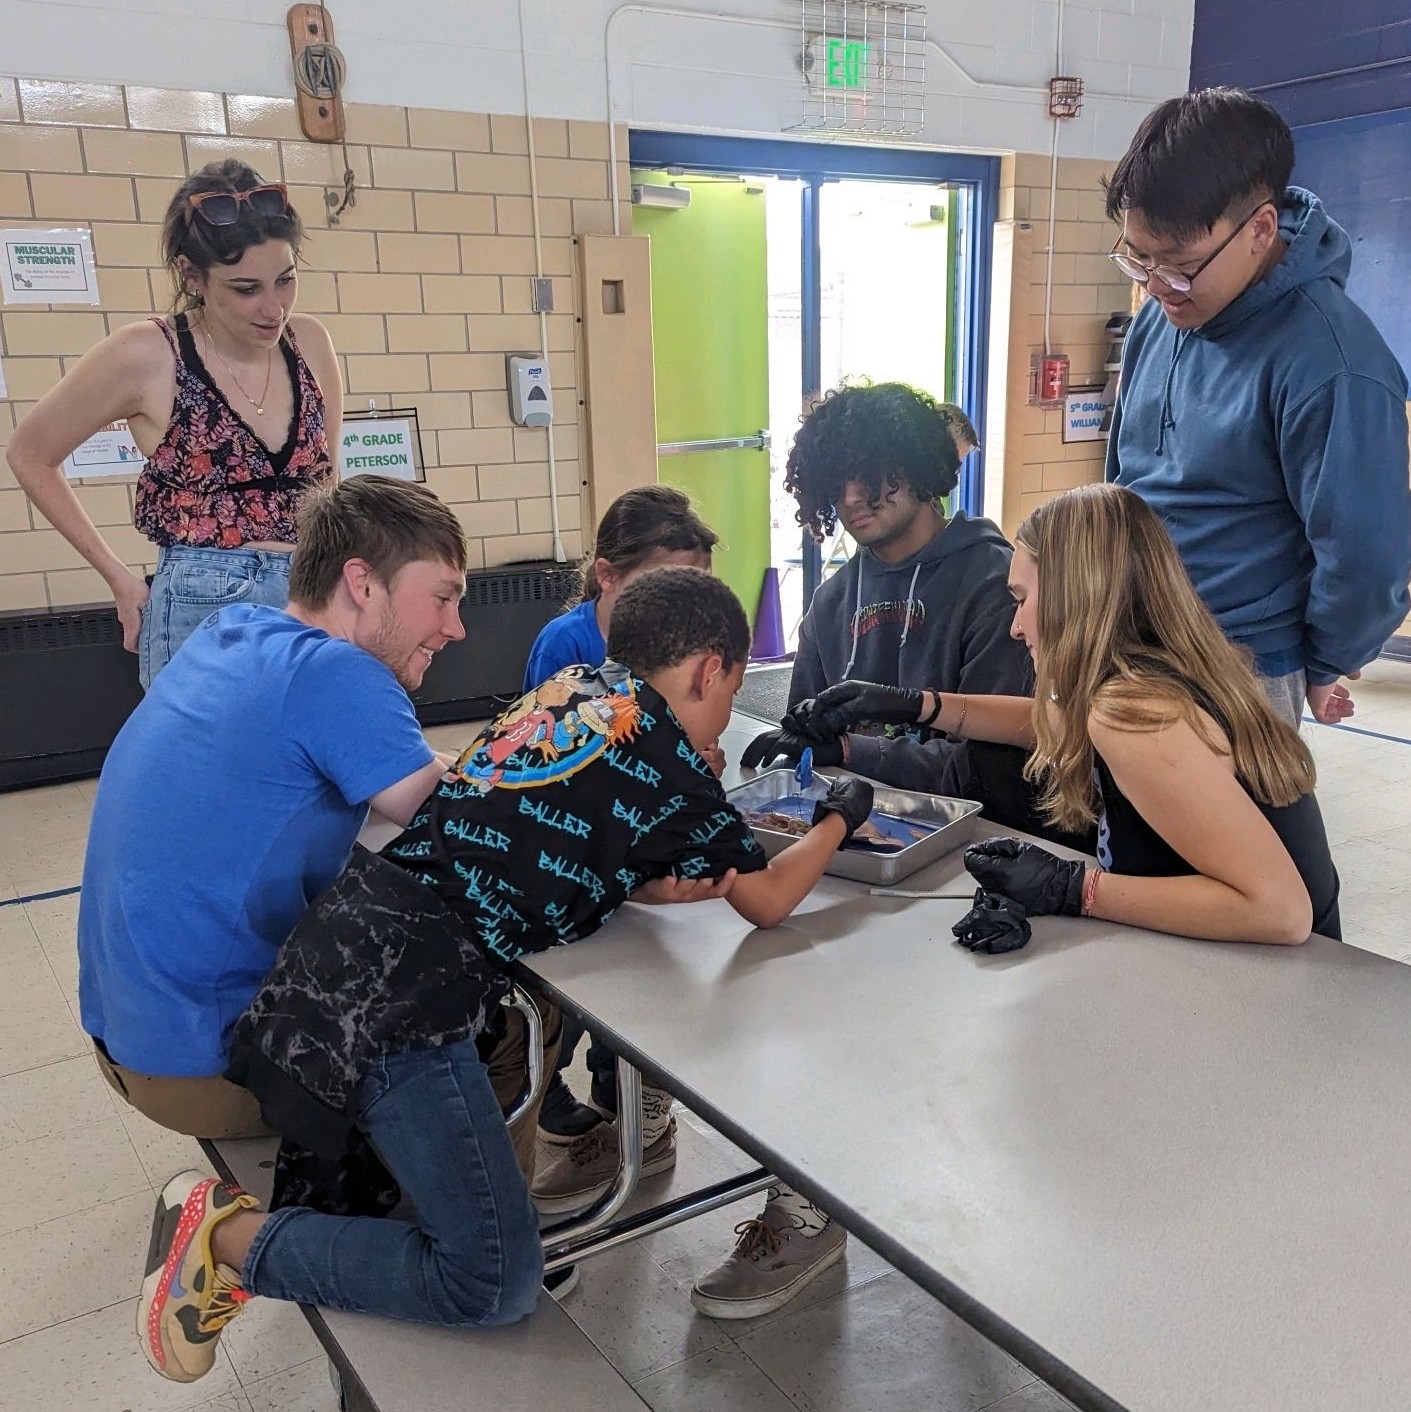  Emma Langas '25, Patrick Hecht '24, Connor Johnson '24, Charlotte Agliata '25, and Sam Lee '23 work with Midland Elementary School students on science experiments during the 2022-2023 school year. Photo submitted by Caitlin Kim '24. 